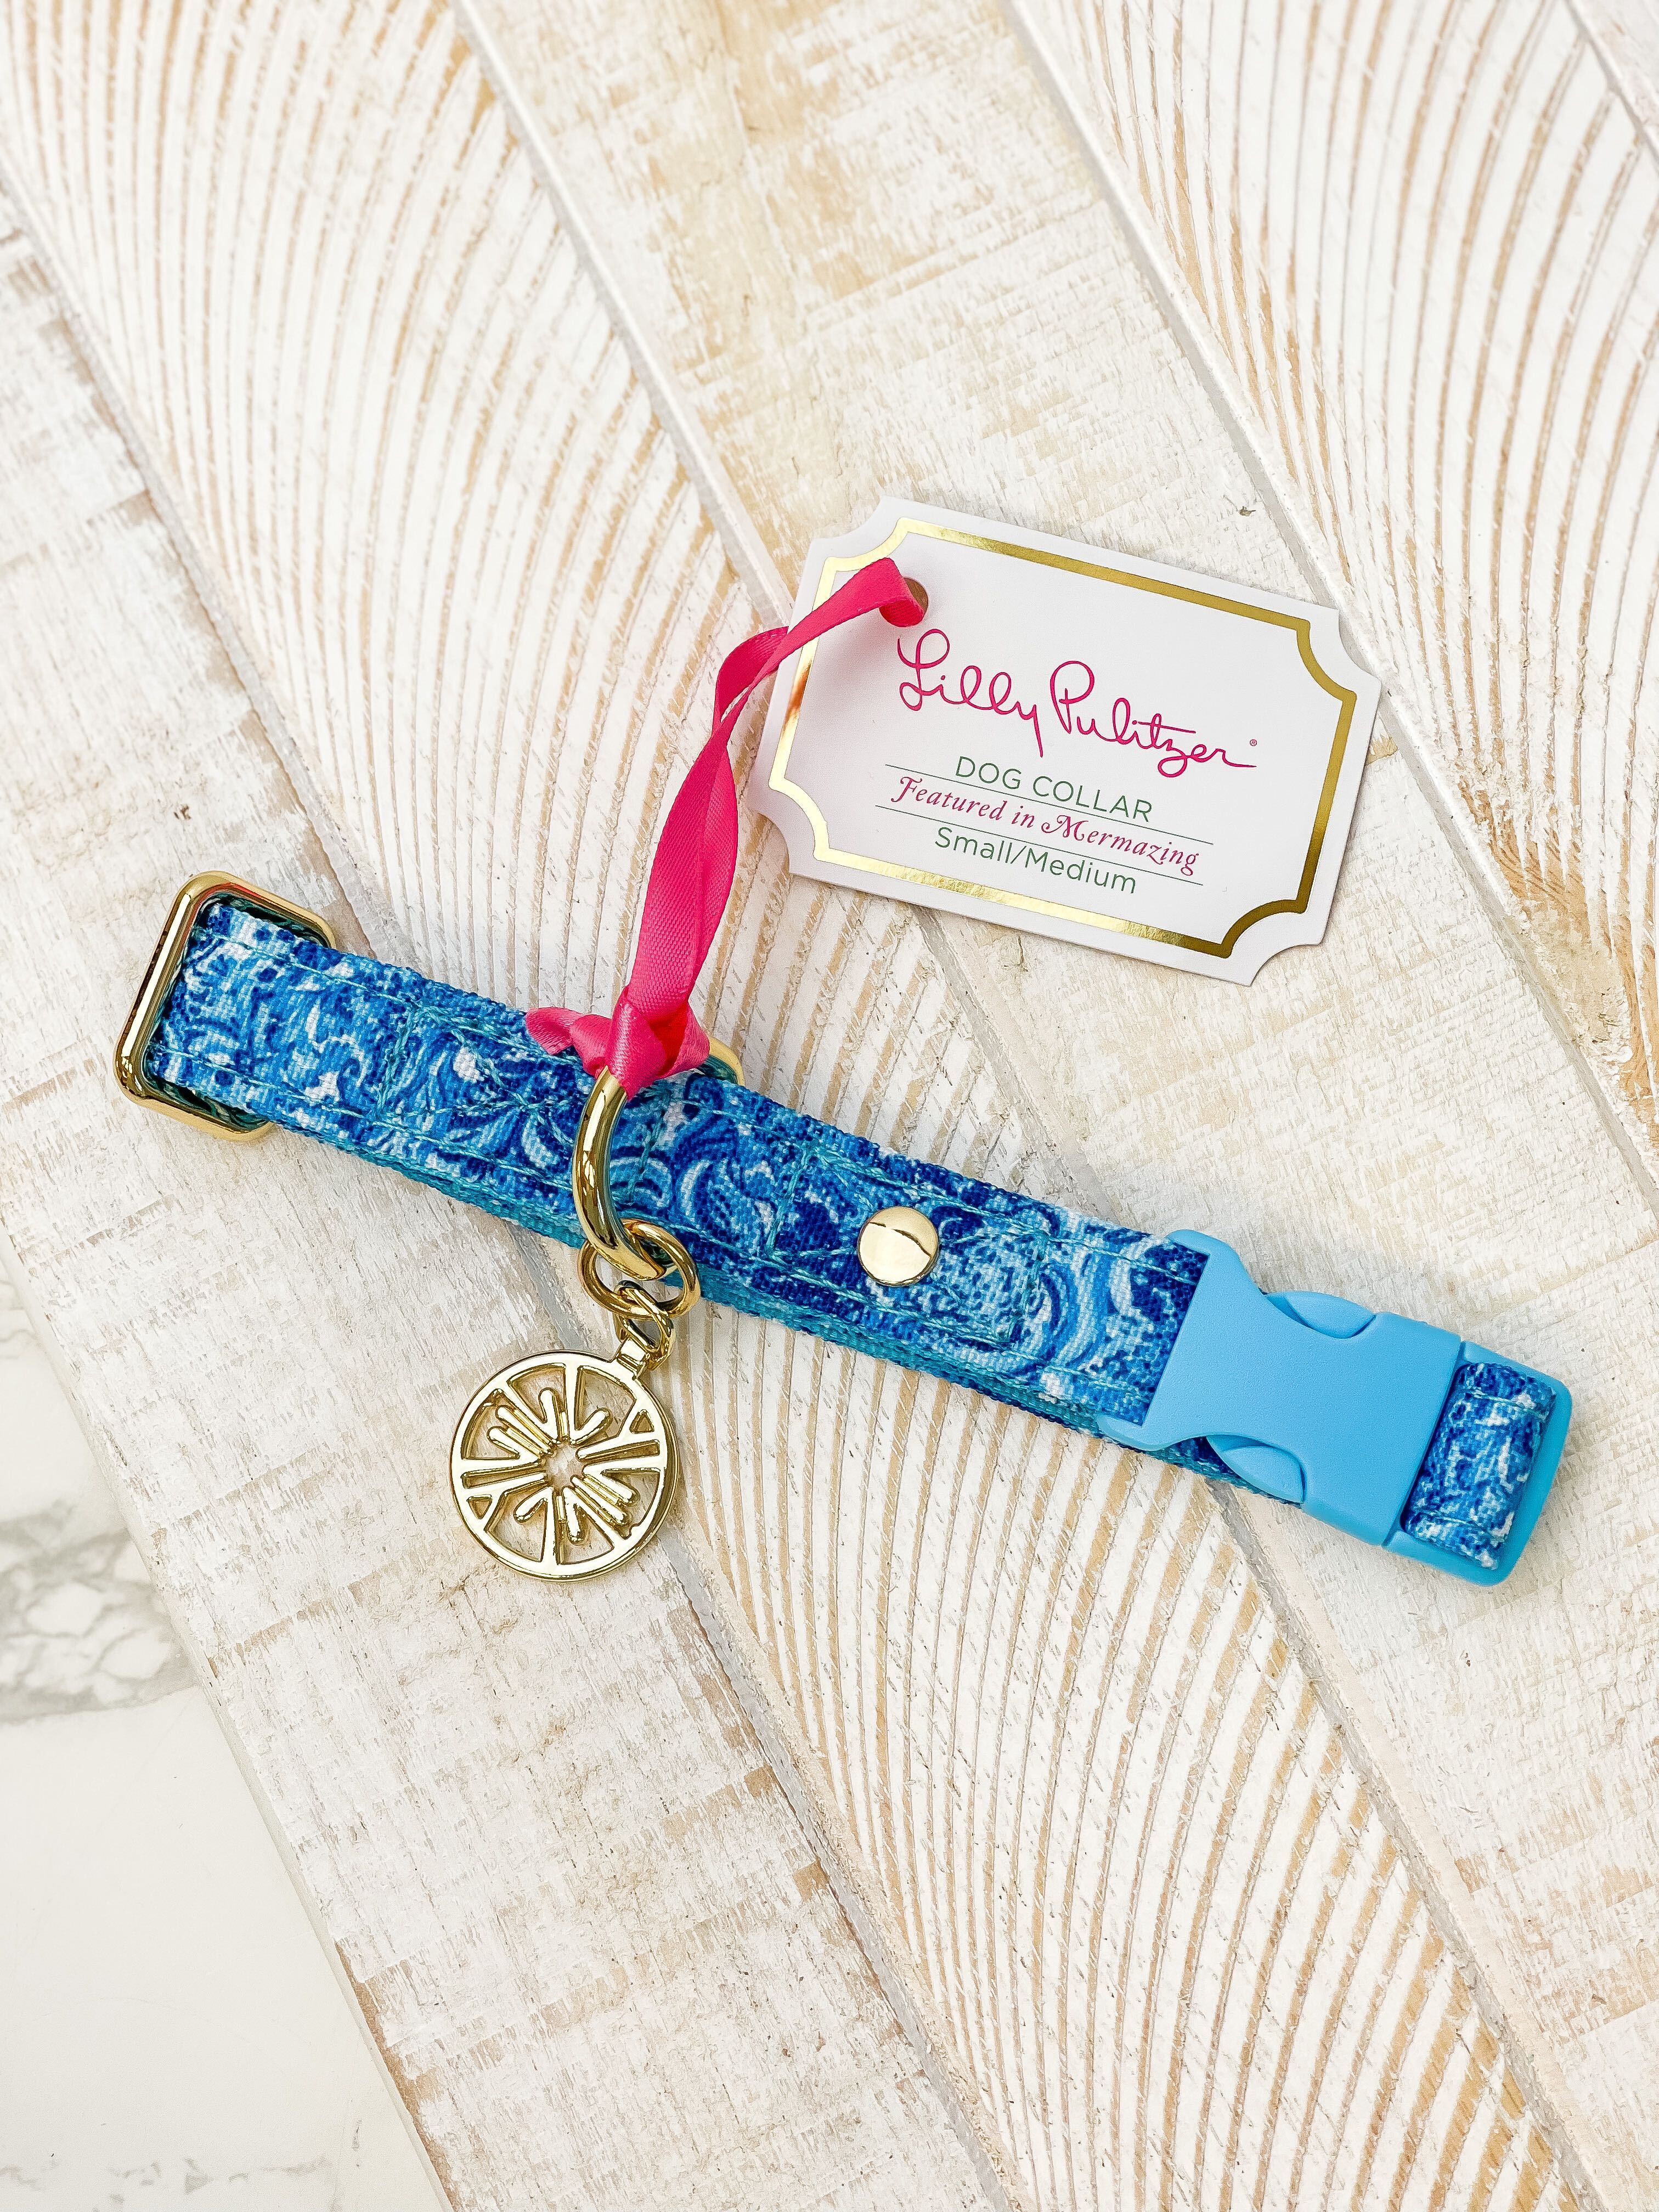 Dog Collar by Lilly Pulitzer - Mermazing (S/M)